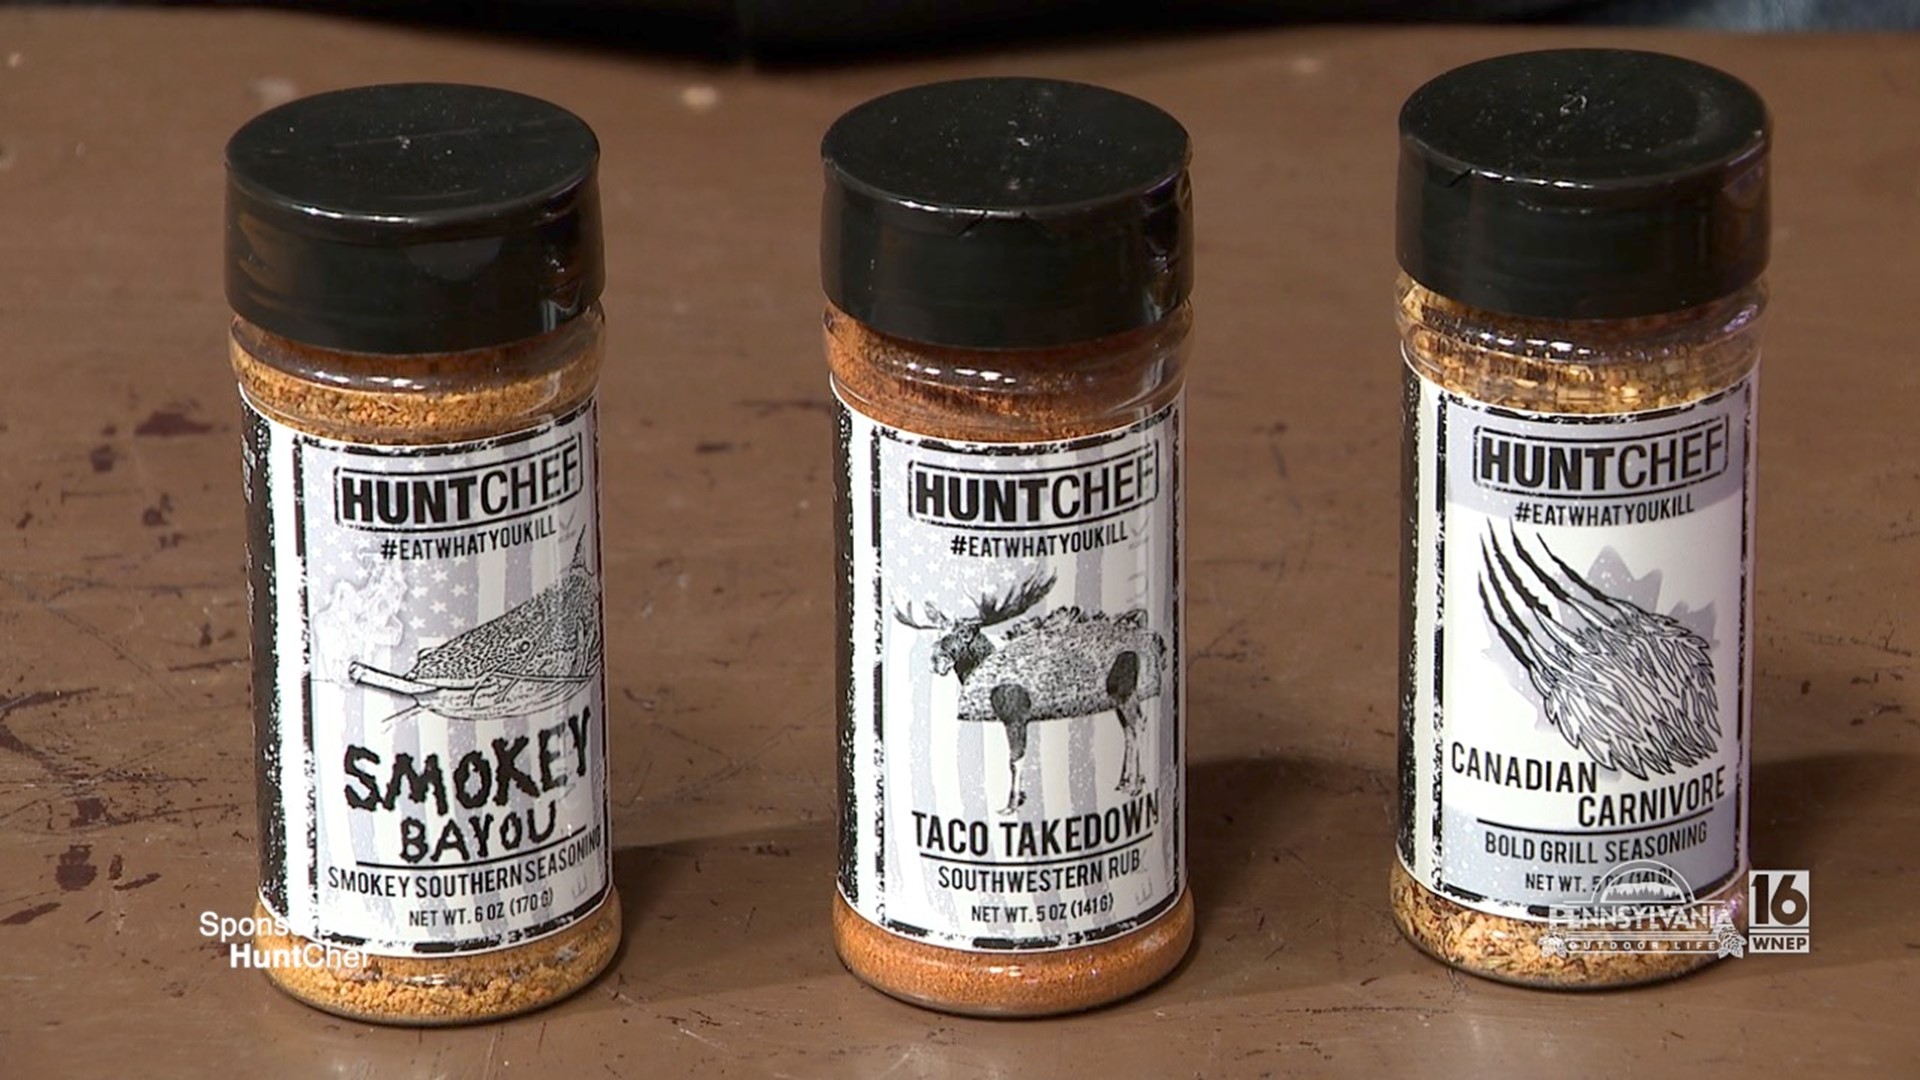 Seasonings for your favorite wild game recipes.